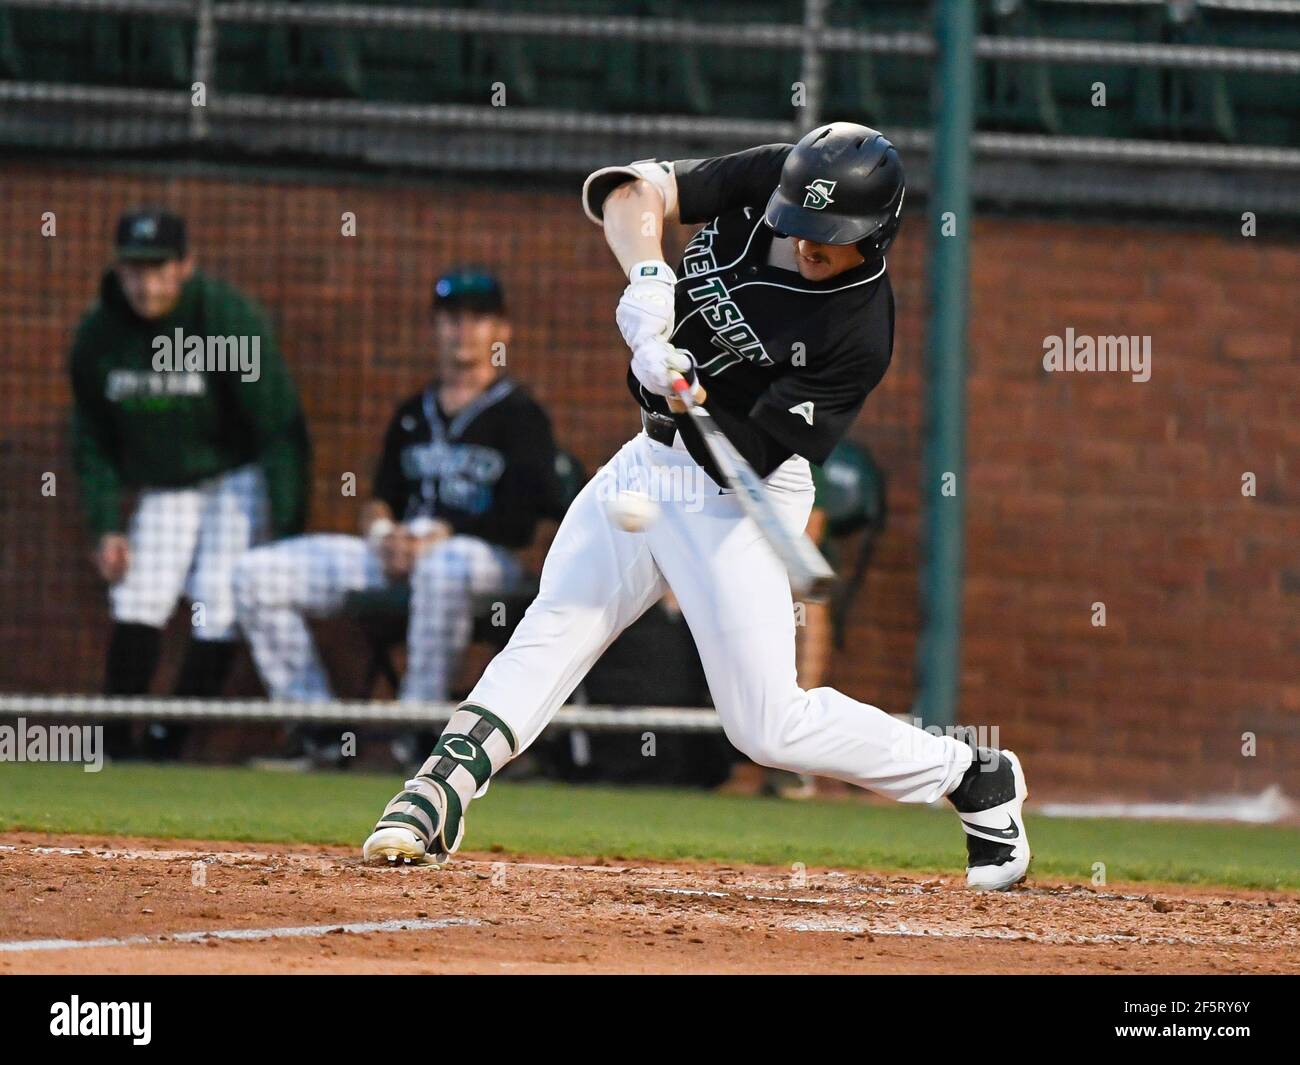 Deland, FL, USA. 27th Mar, 2021. Stetson outfielder Andrew MacNeil (7)  during NCAA baseball game between the Florida Gulf Coast Eagles and the  Stetson Hatters at Melching Field in Deland, FL Romeo